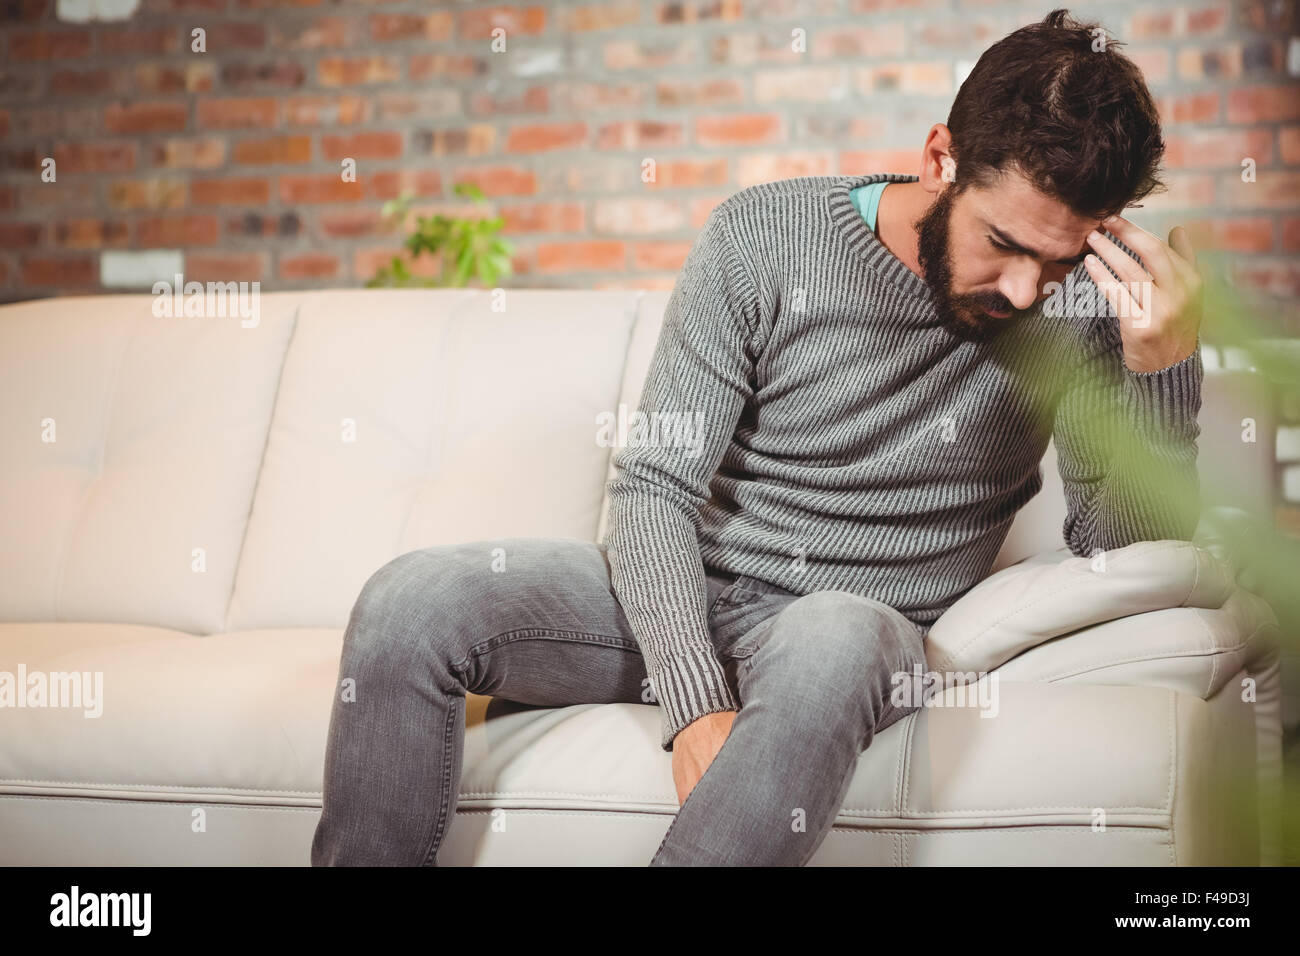 Stressed man holding his forehead Stock Photo